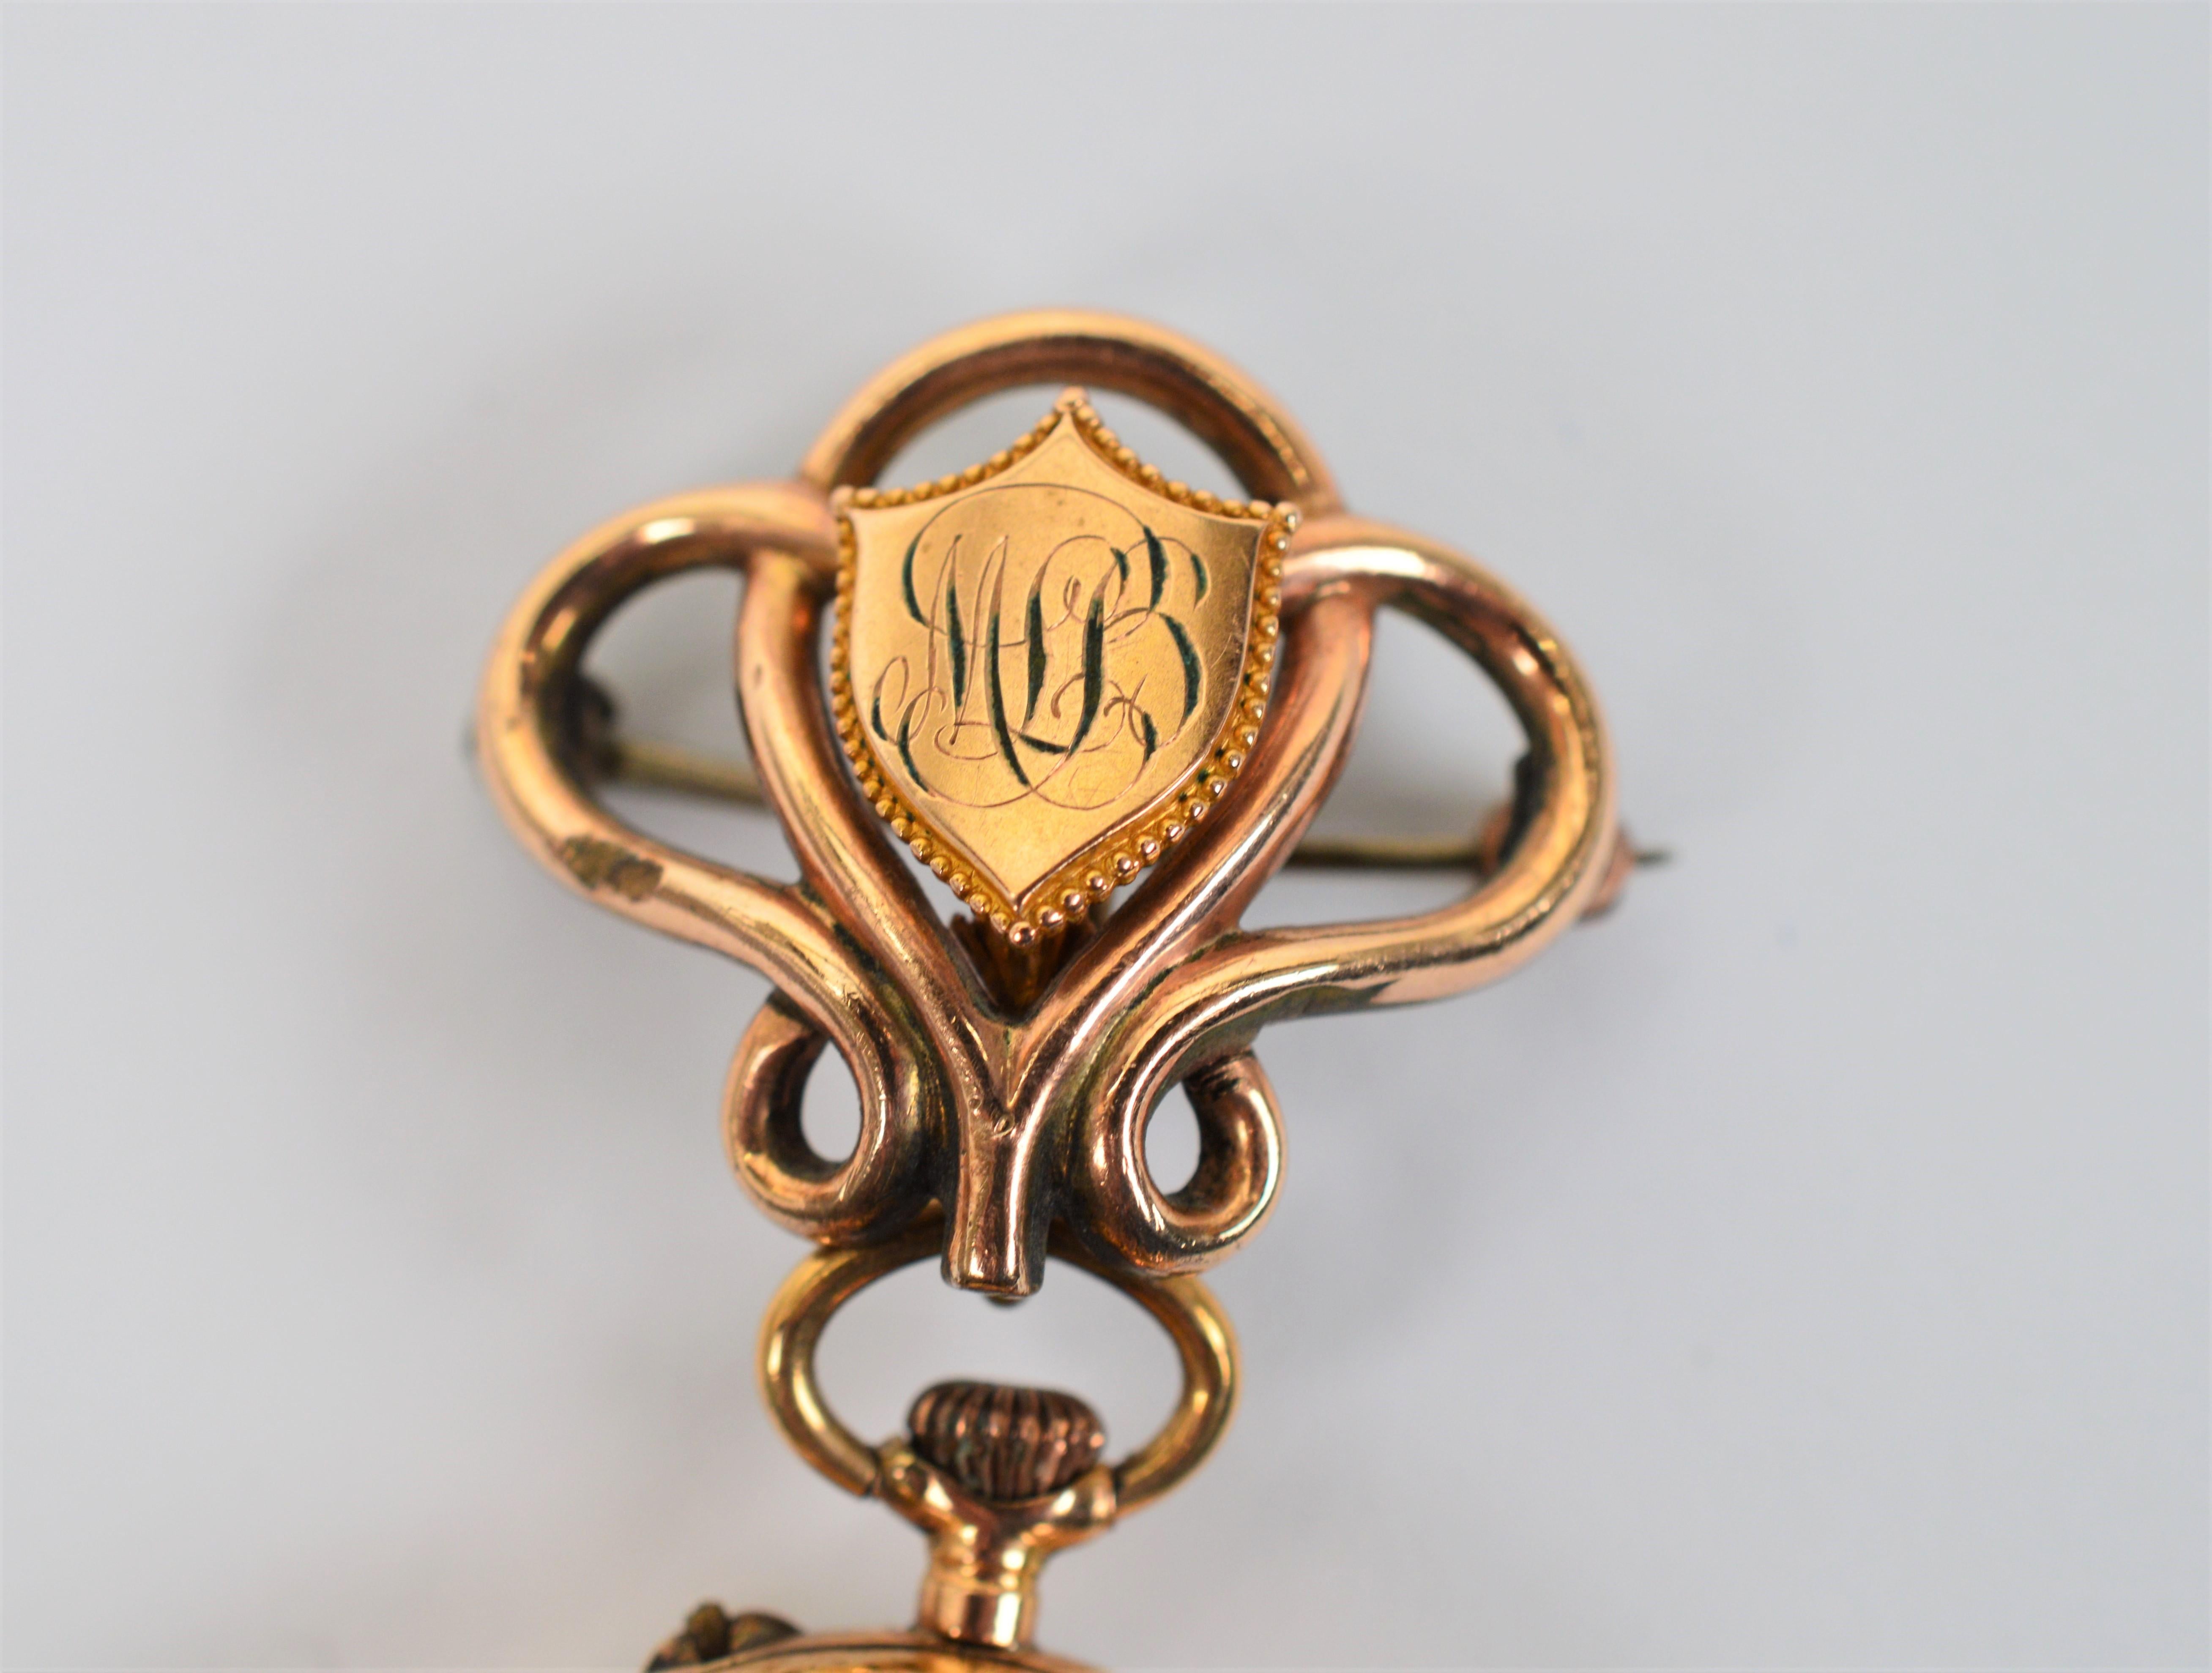 Antique 14 Karat Gold 19th Century Watch Pin Brooch In Good Condition For Sale In Mount Kisco, NY